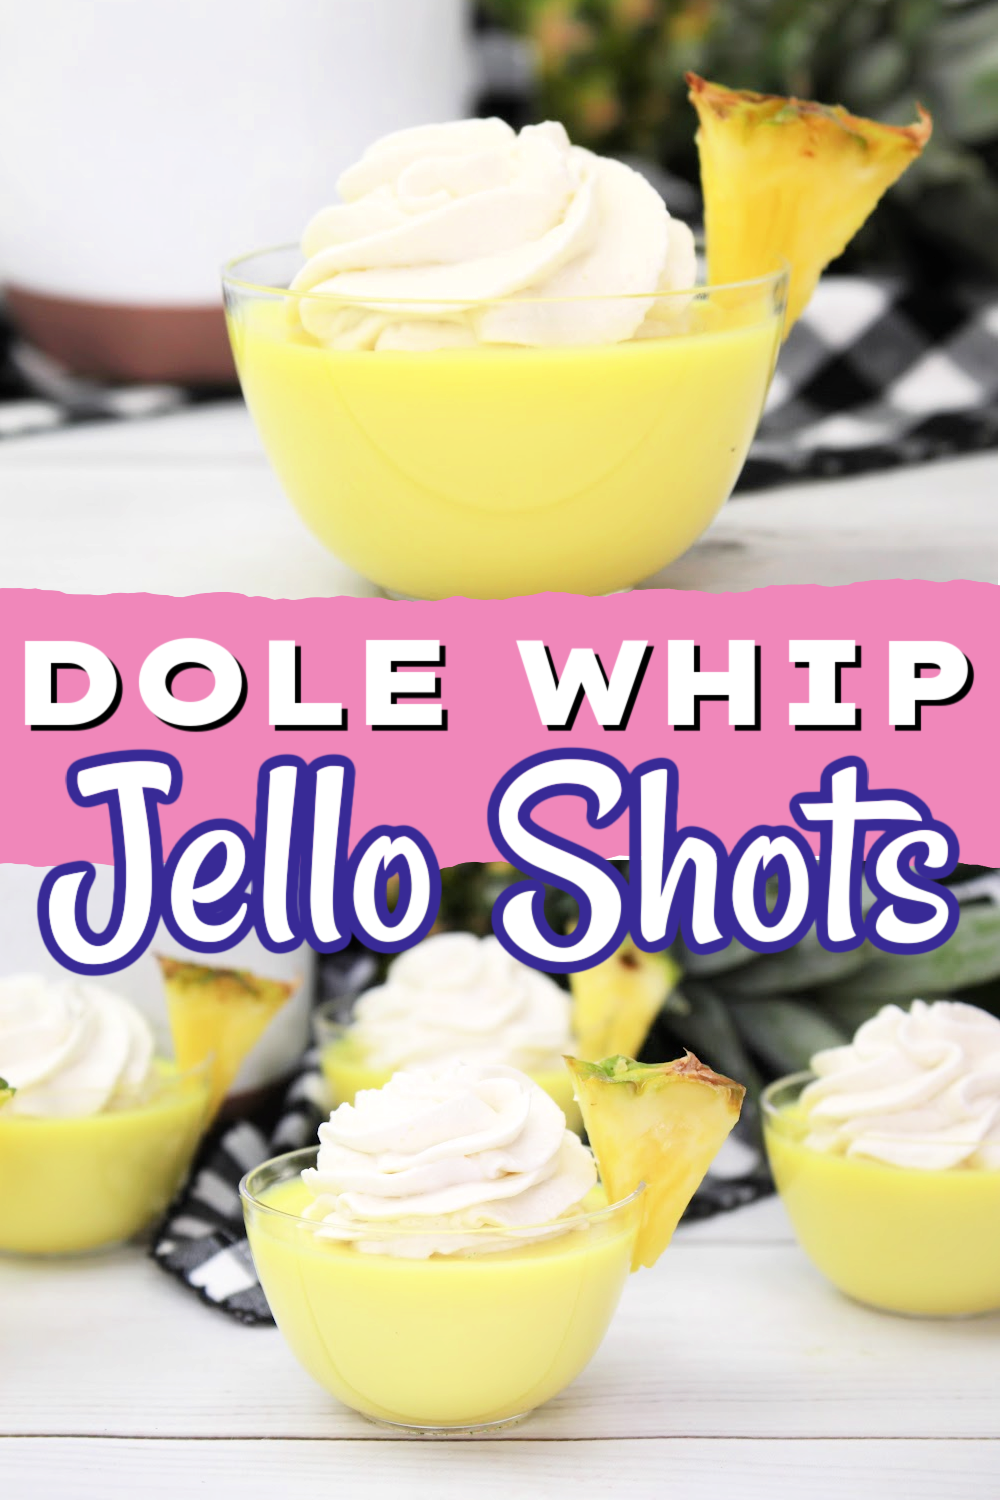 Double pin image of A Dole Whip jello shot in small cups topped with whipped cream and garnished with a small wedge of pineapple.